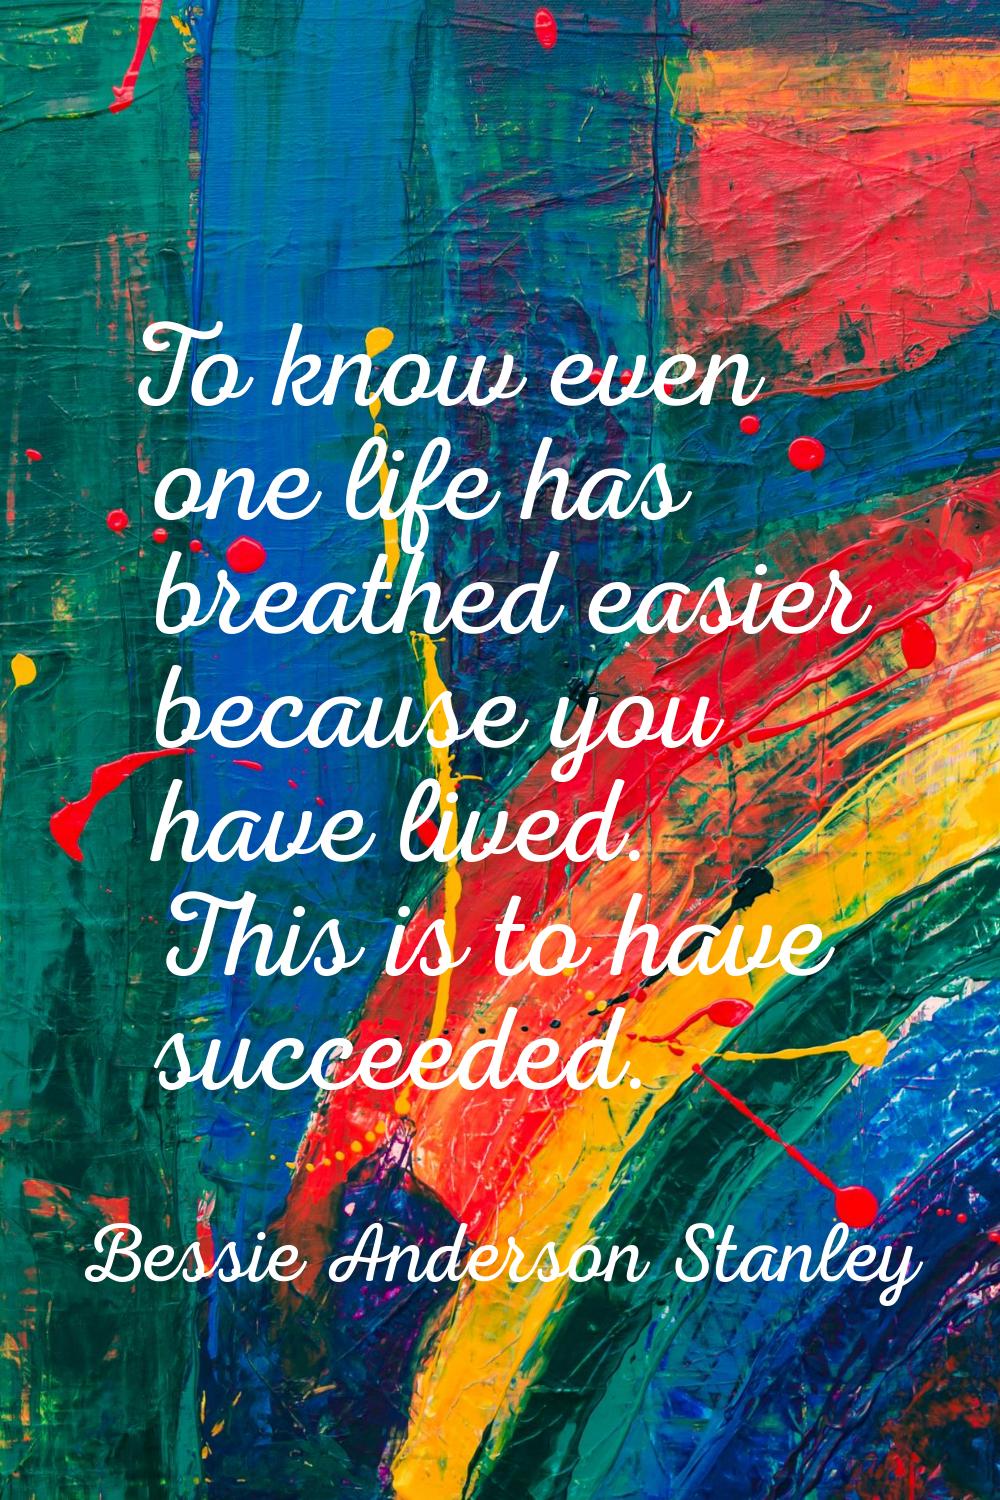 To know even one life has breathed easier because you have lived. This is to have succeeded.